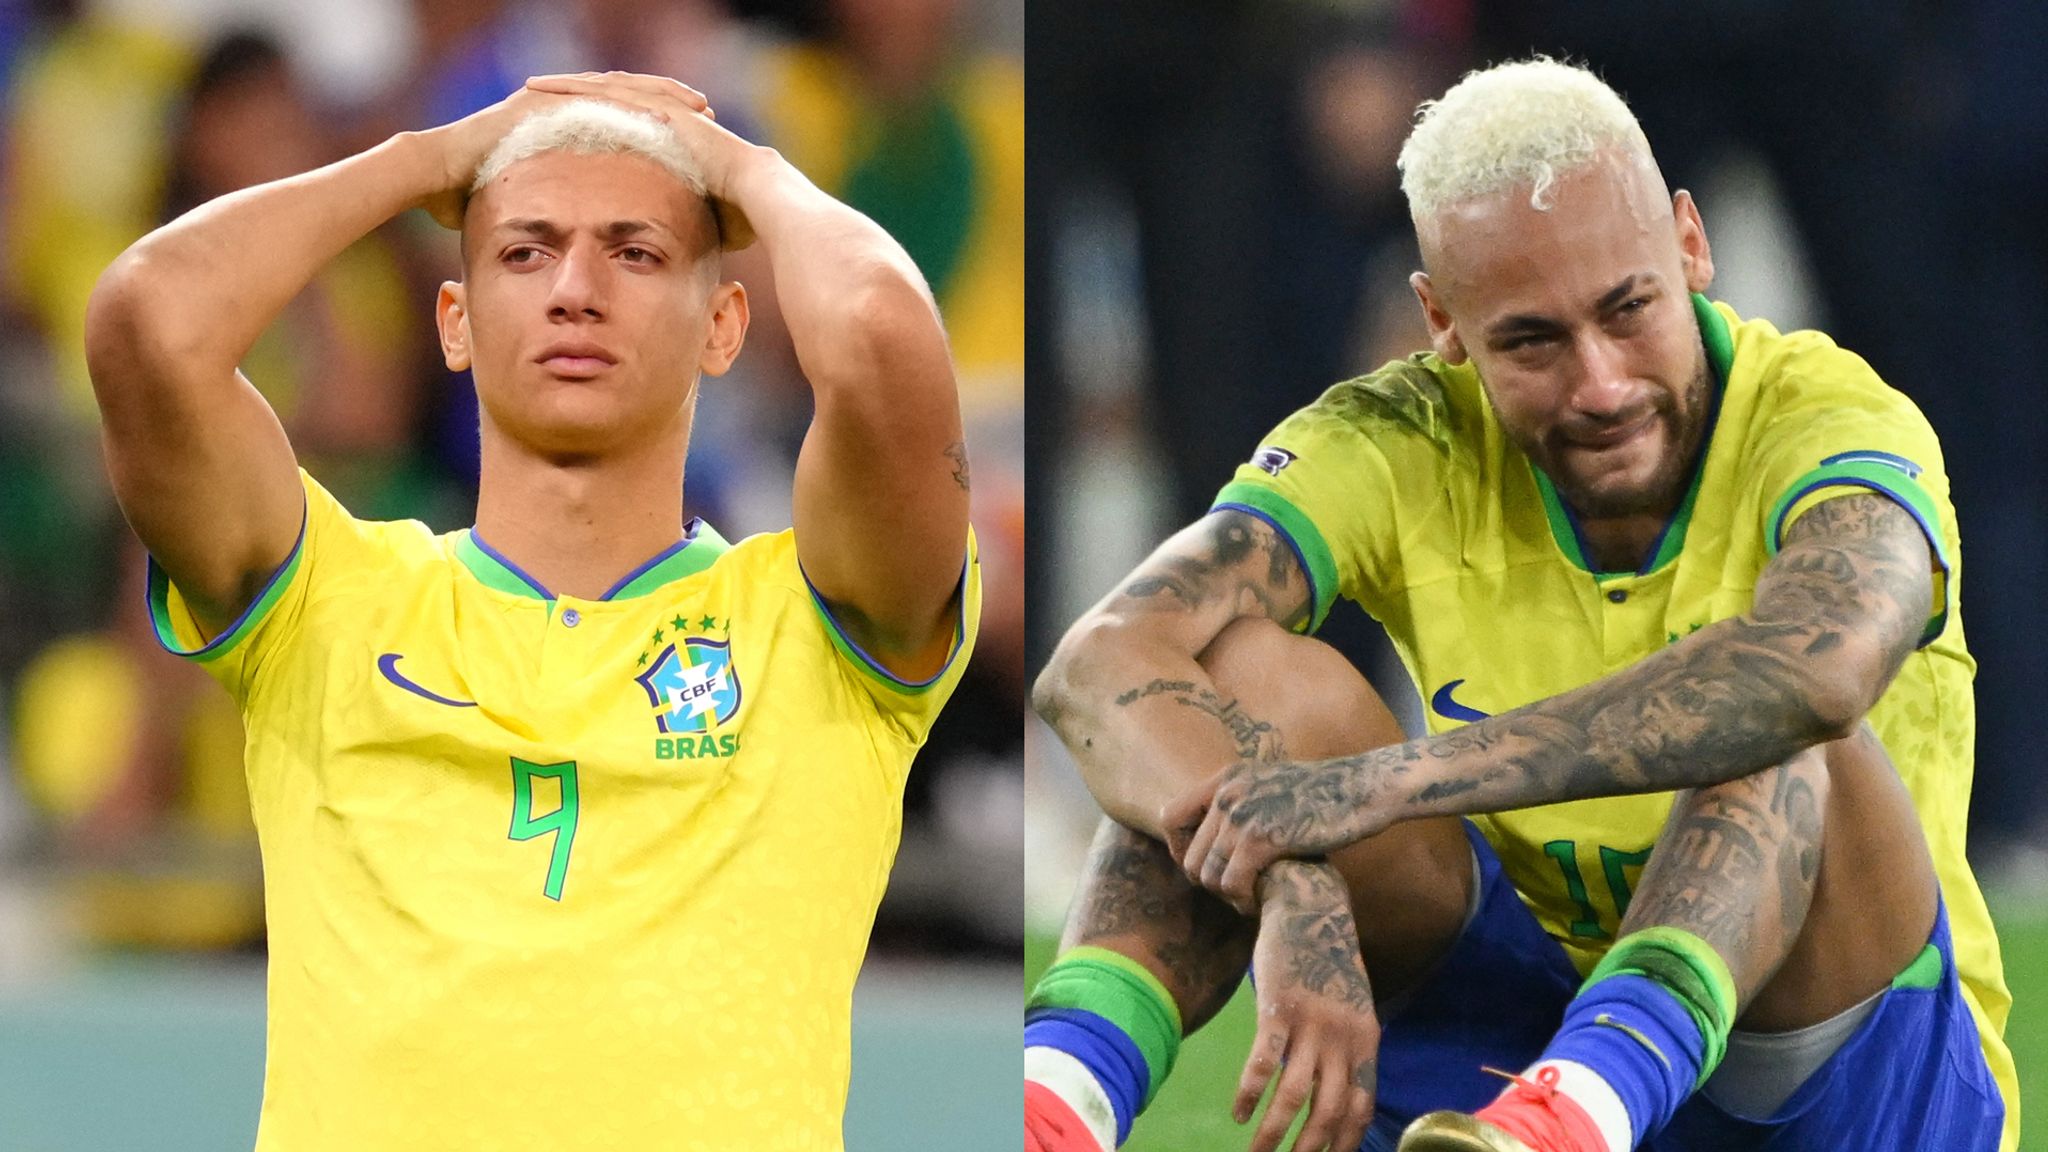 FIFA World Cup 2022: Brazil's results, scores and standings